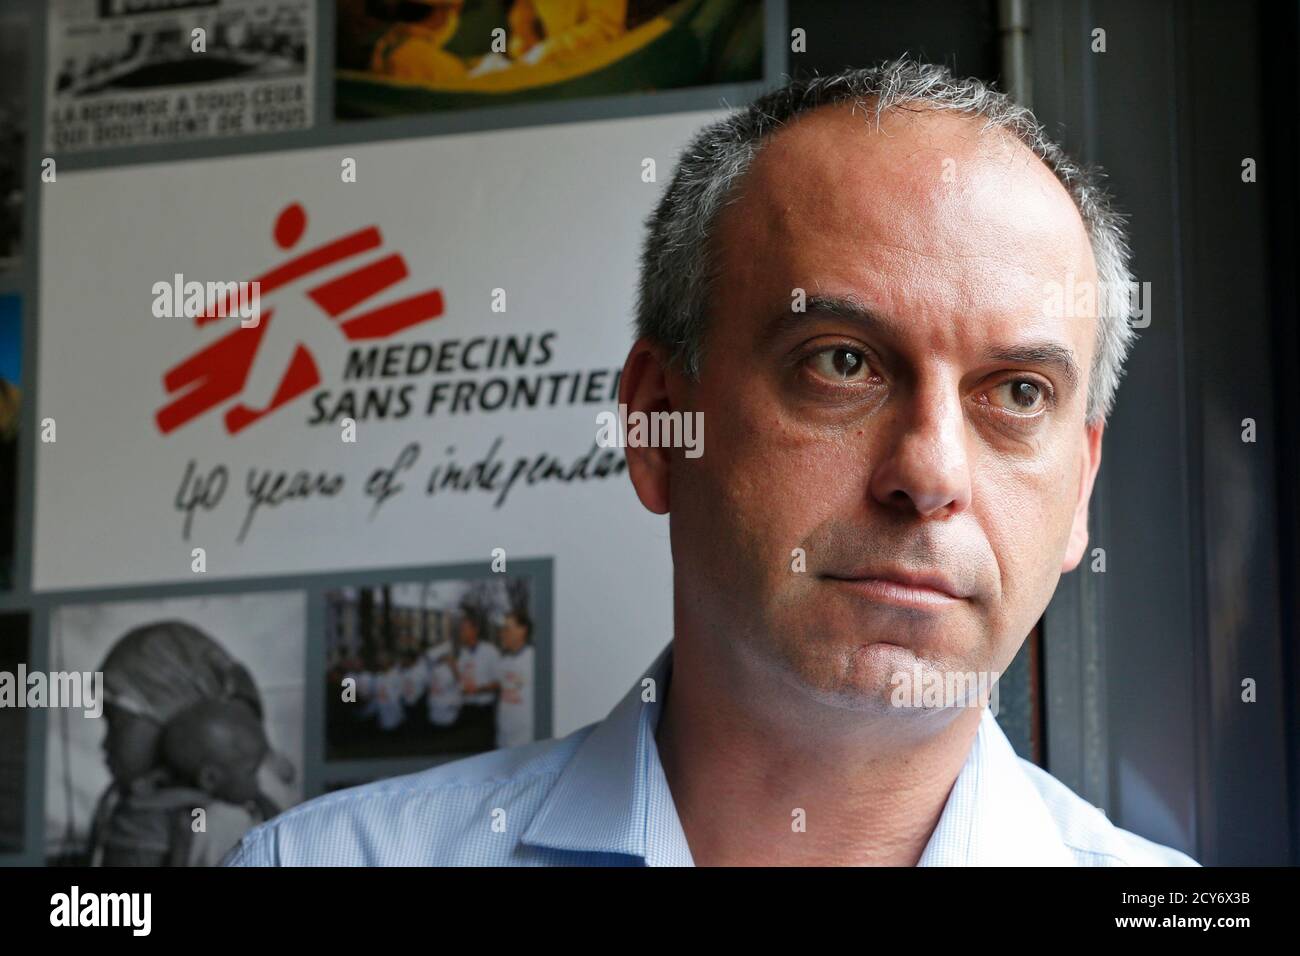 Mego Terzian, head of Medecins sans Frontieres France (MSF), poses during  an interview with Reuters at the MSF headquarters in Paris August 29, 2014.  The U.N. Security Council must lead efforts to